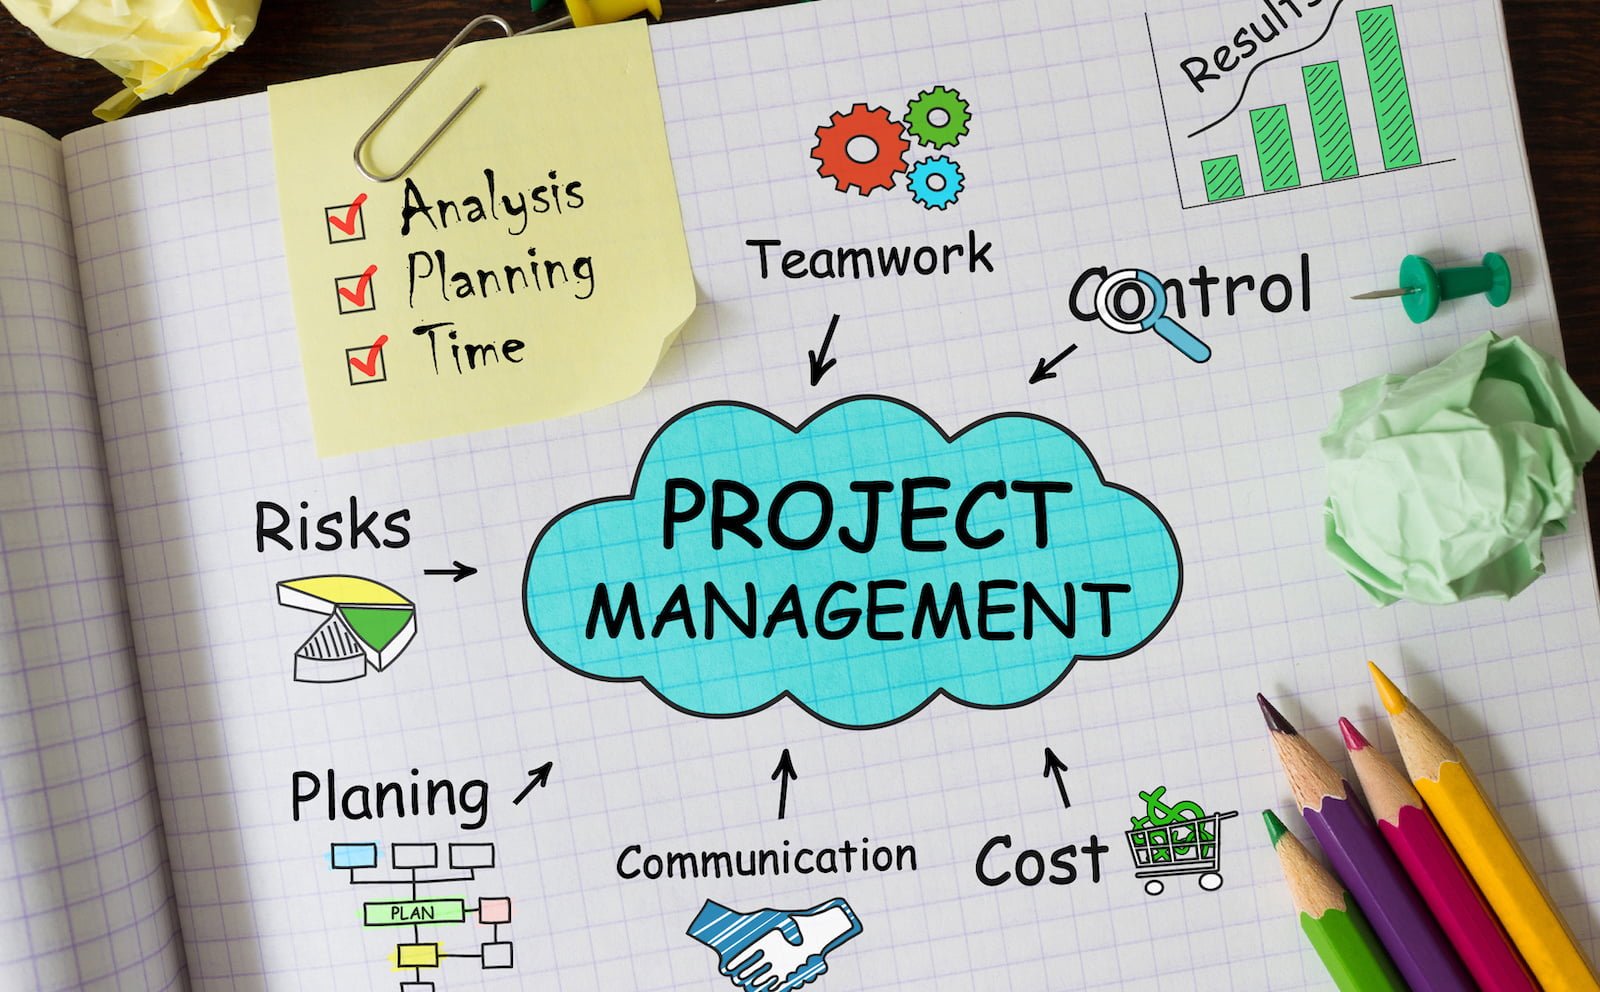 Project Management, Assignment Help, Writing Assignments, Assignment Writing Services, Mycollegeassignment, University Assignment, Academic Pressure, Project Management Assignment.